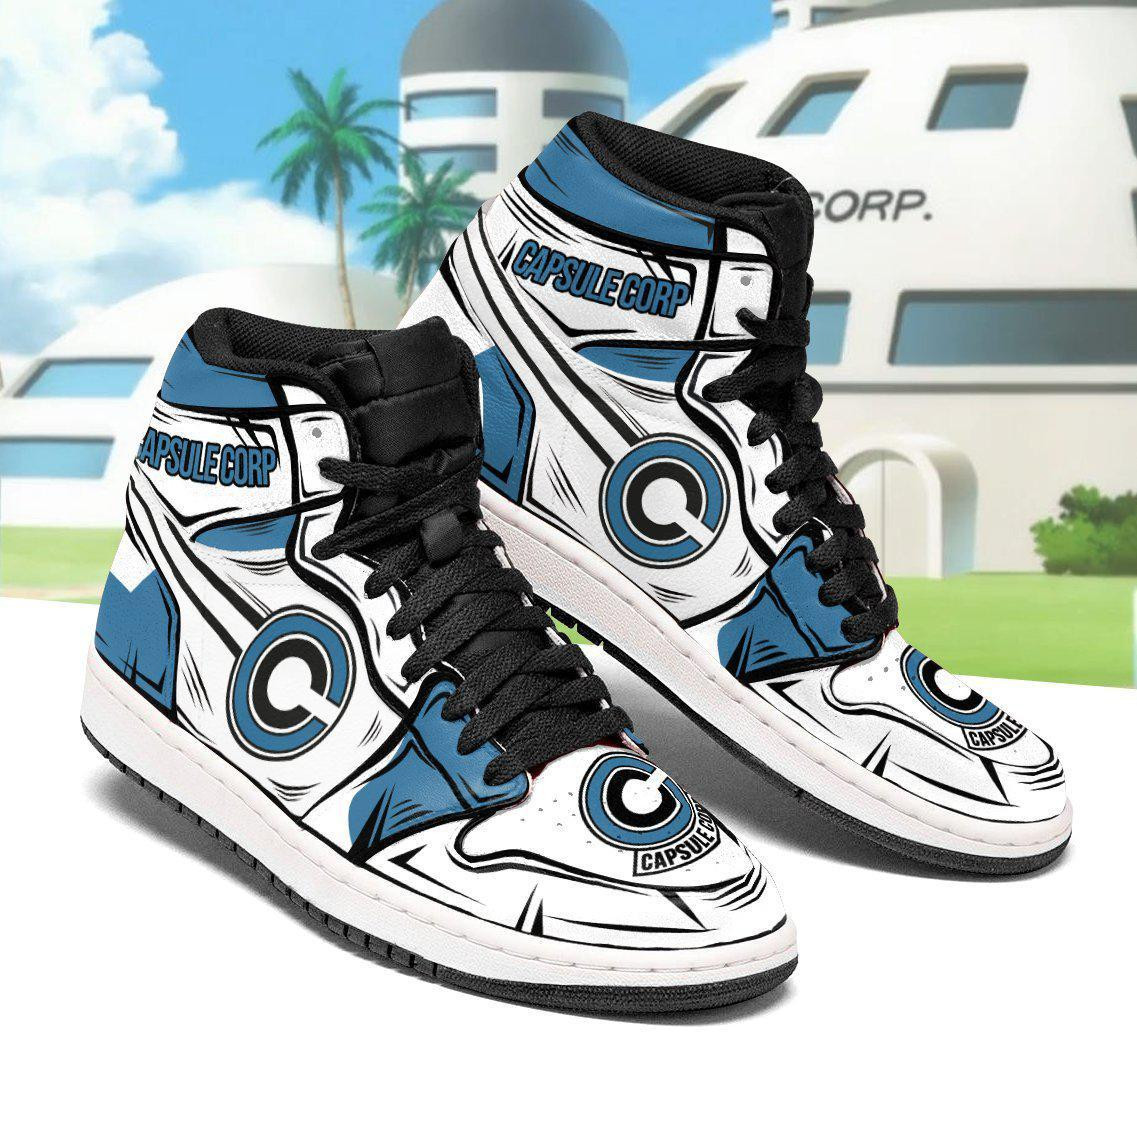 Choose for yourself a custom shoe or are you an Anime fan 20